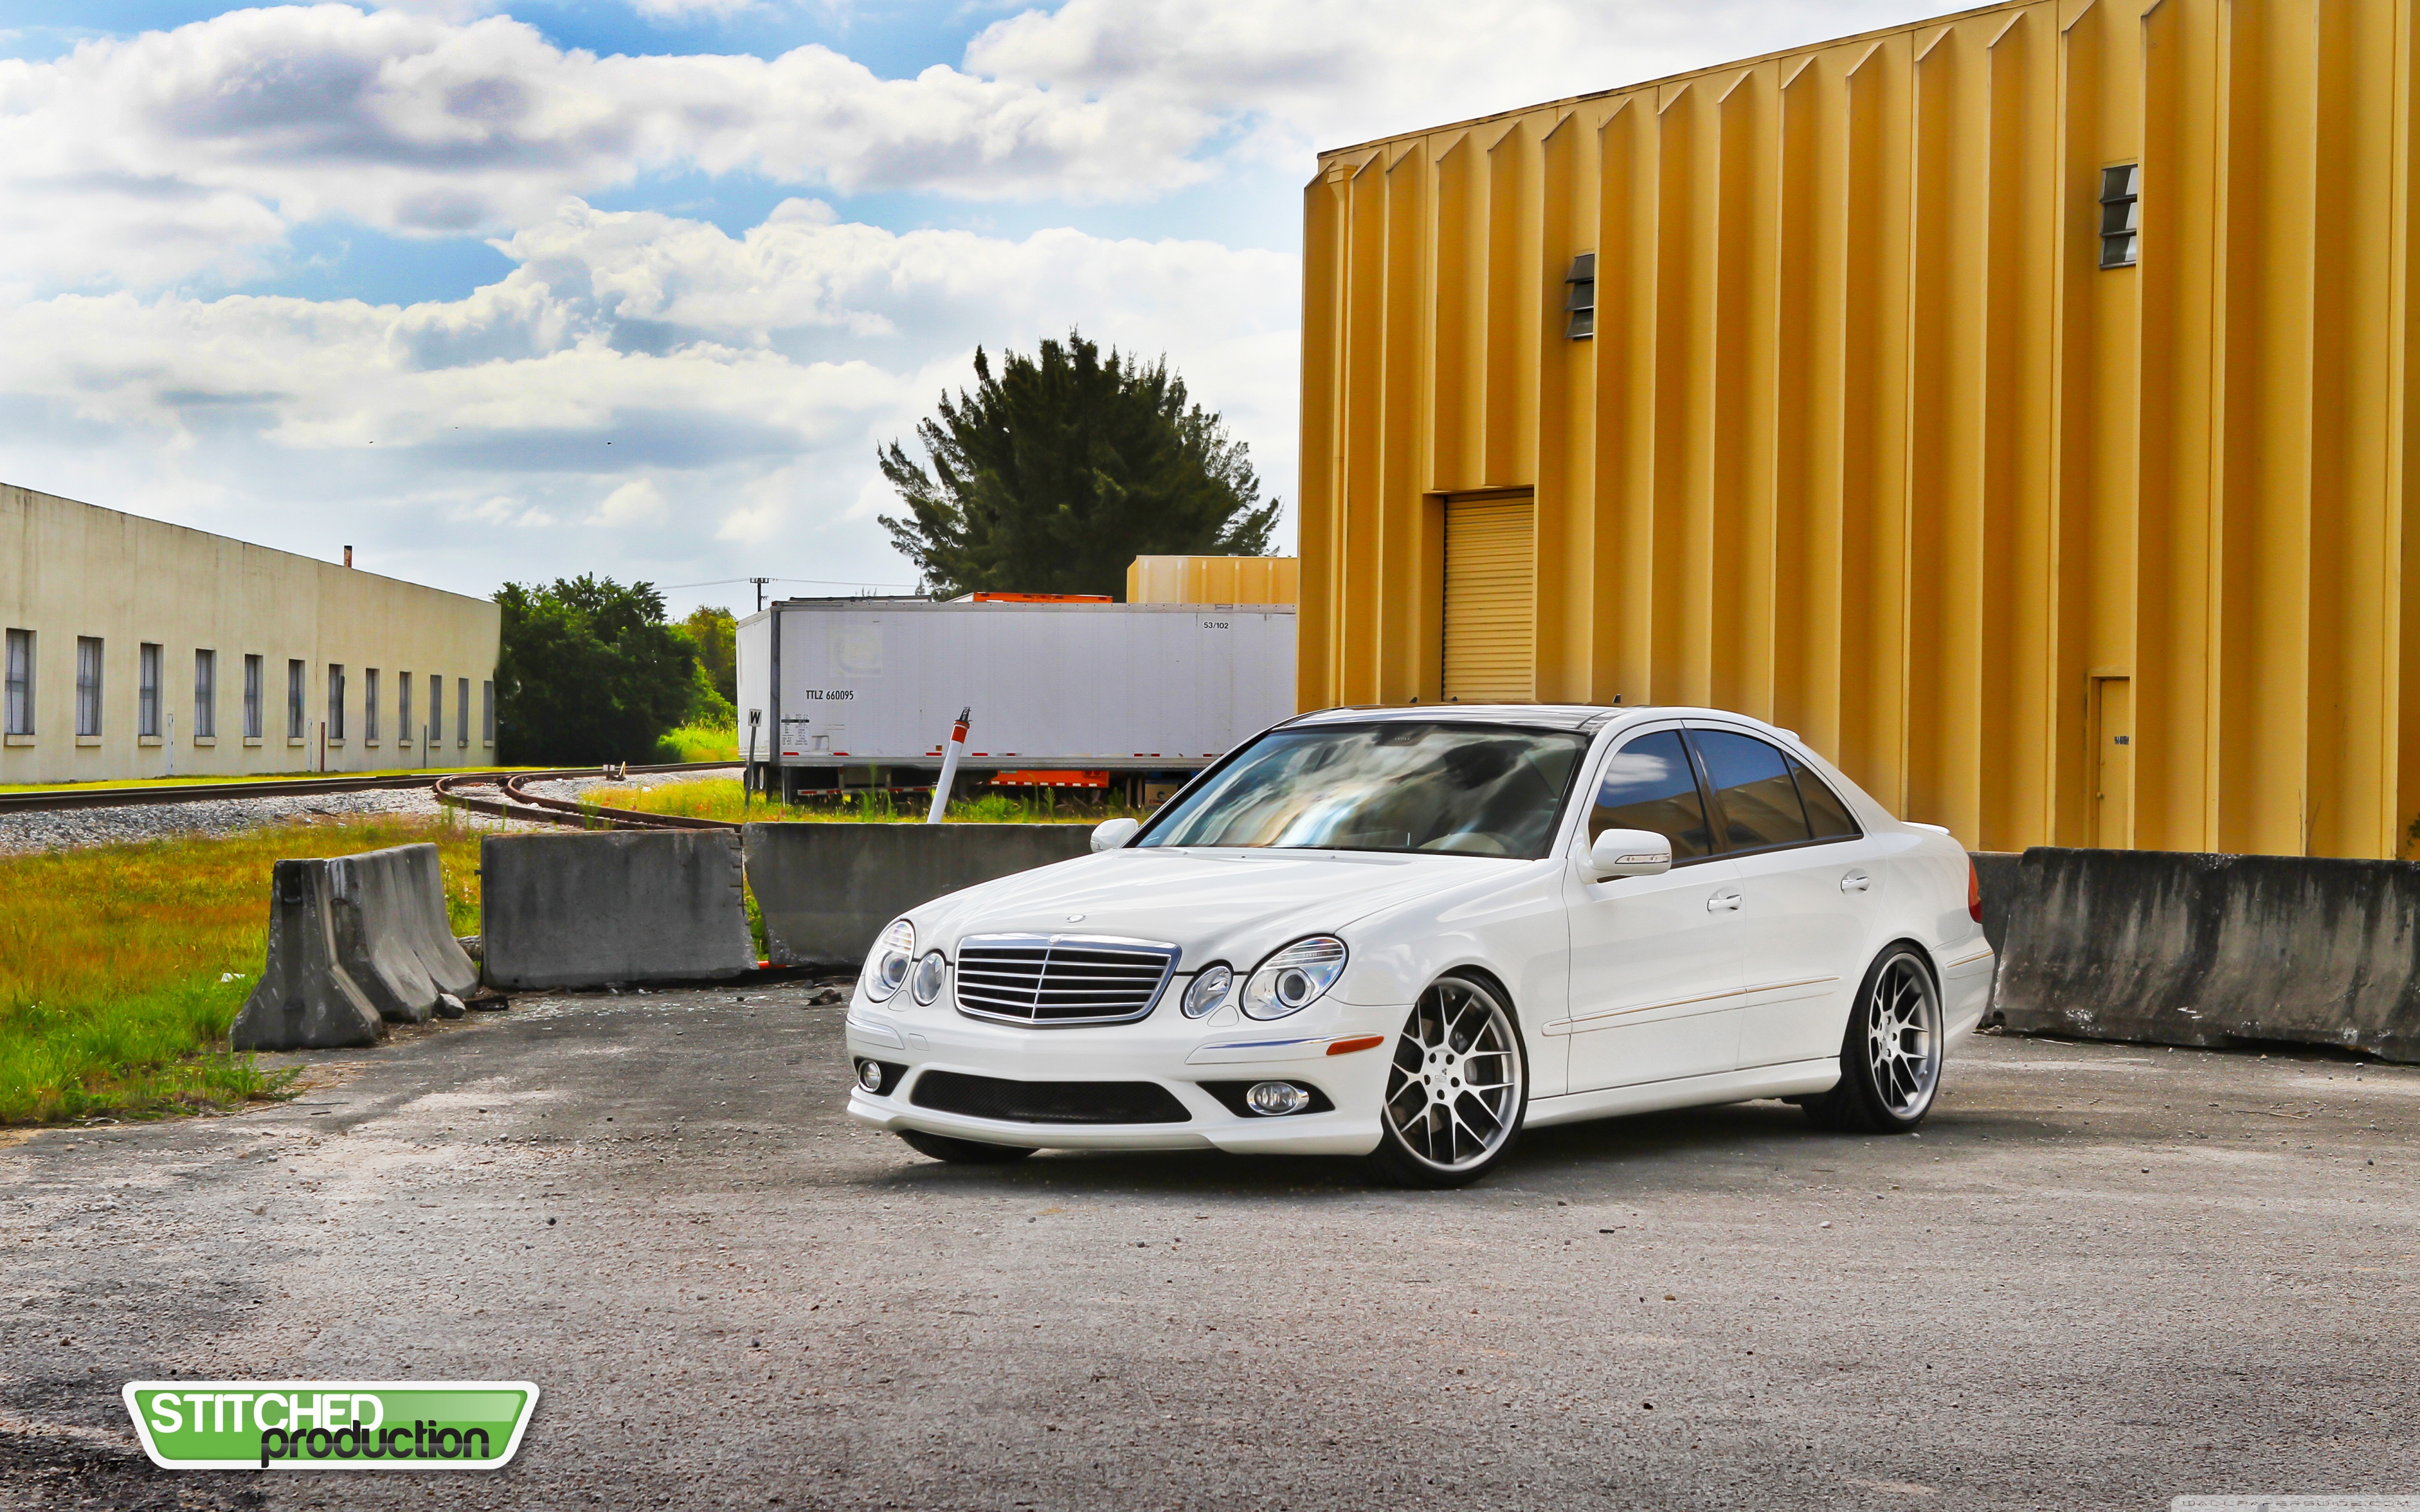 Mercedes Benz E350 I Stitched Production Photography 4k HD